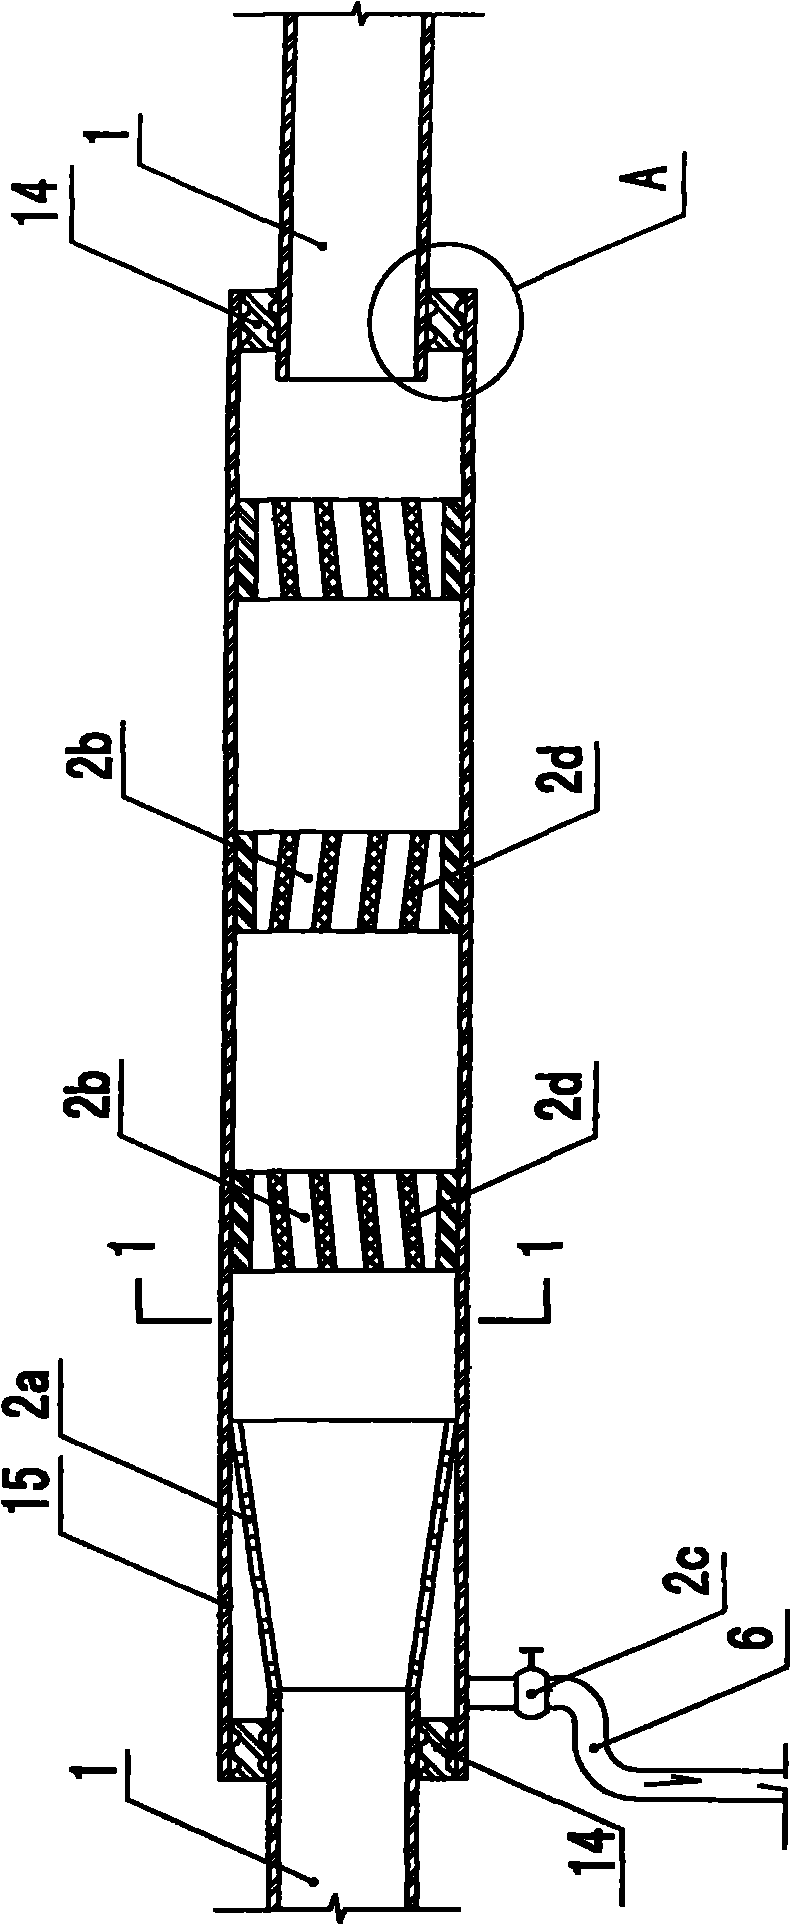 Method and device for reducing wind pressure to building